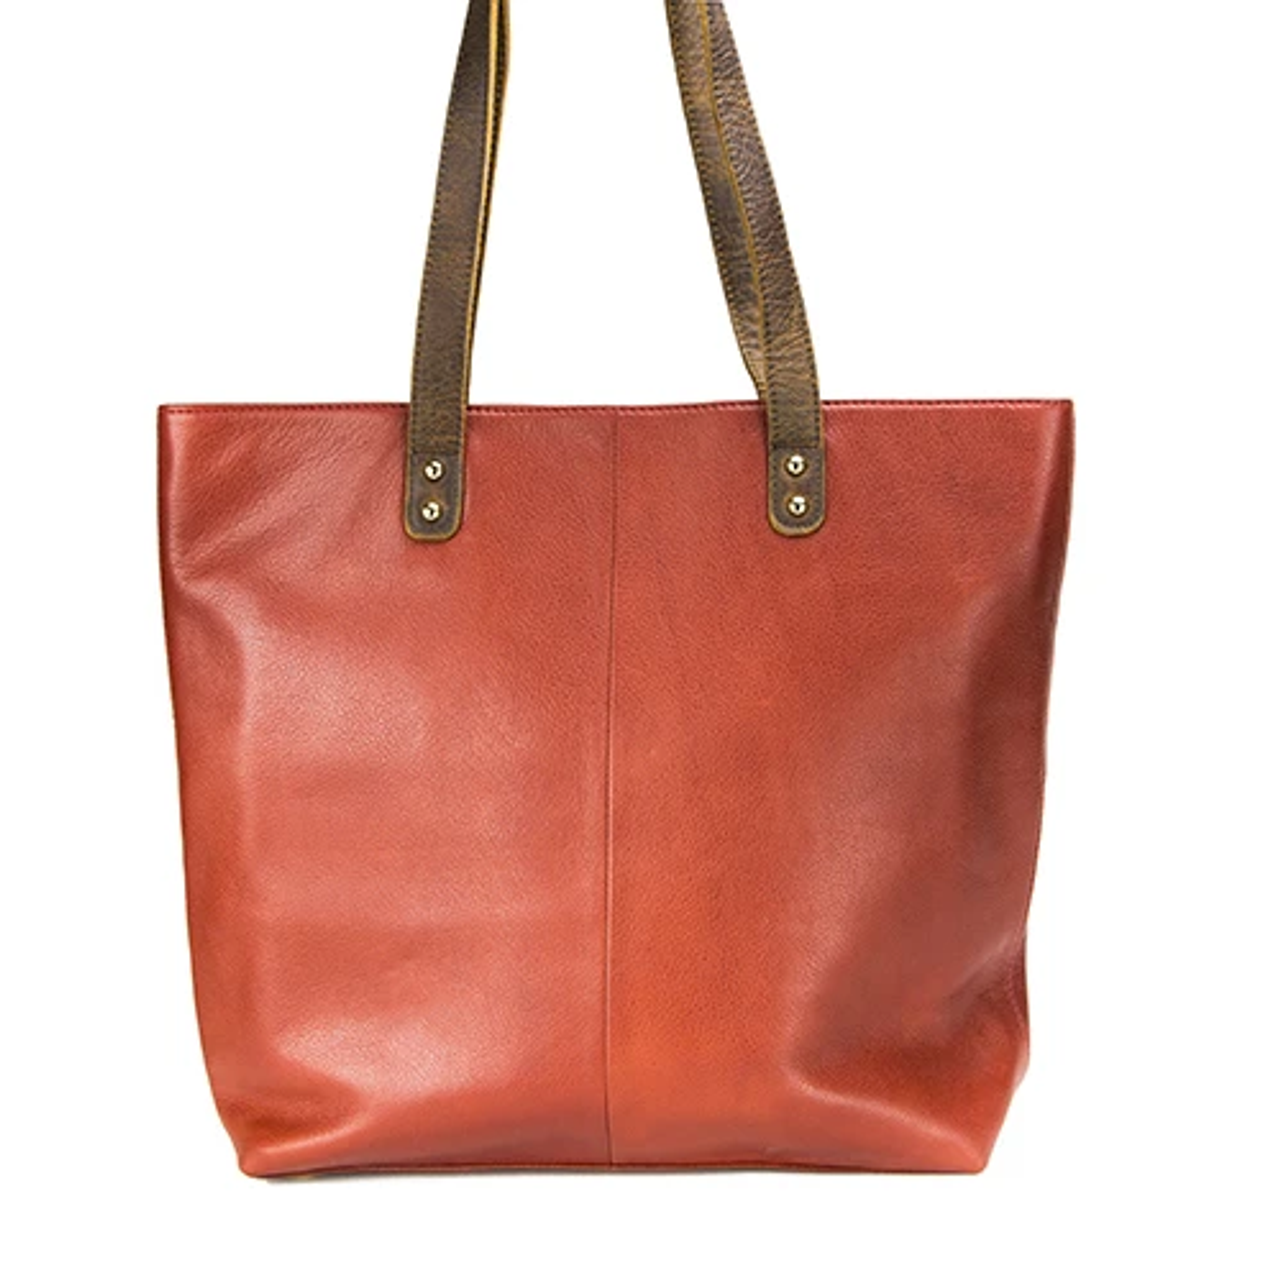 Osgoode Marley Products - Leather Bag Outlet